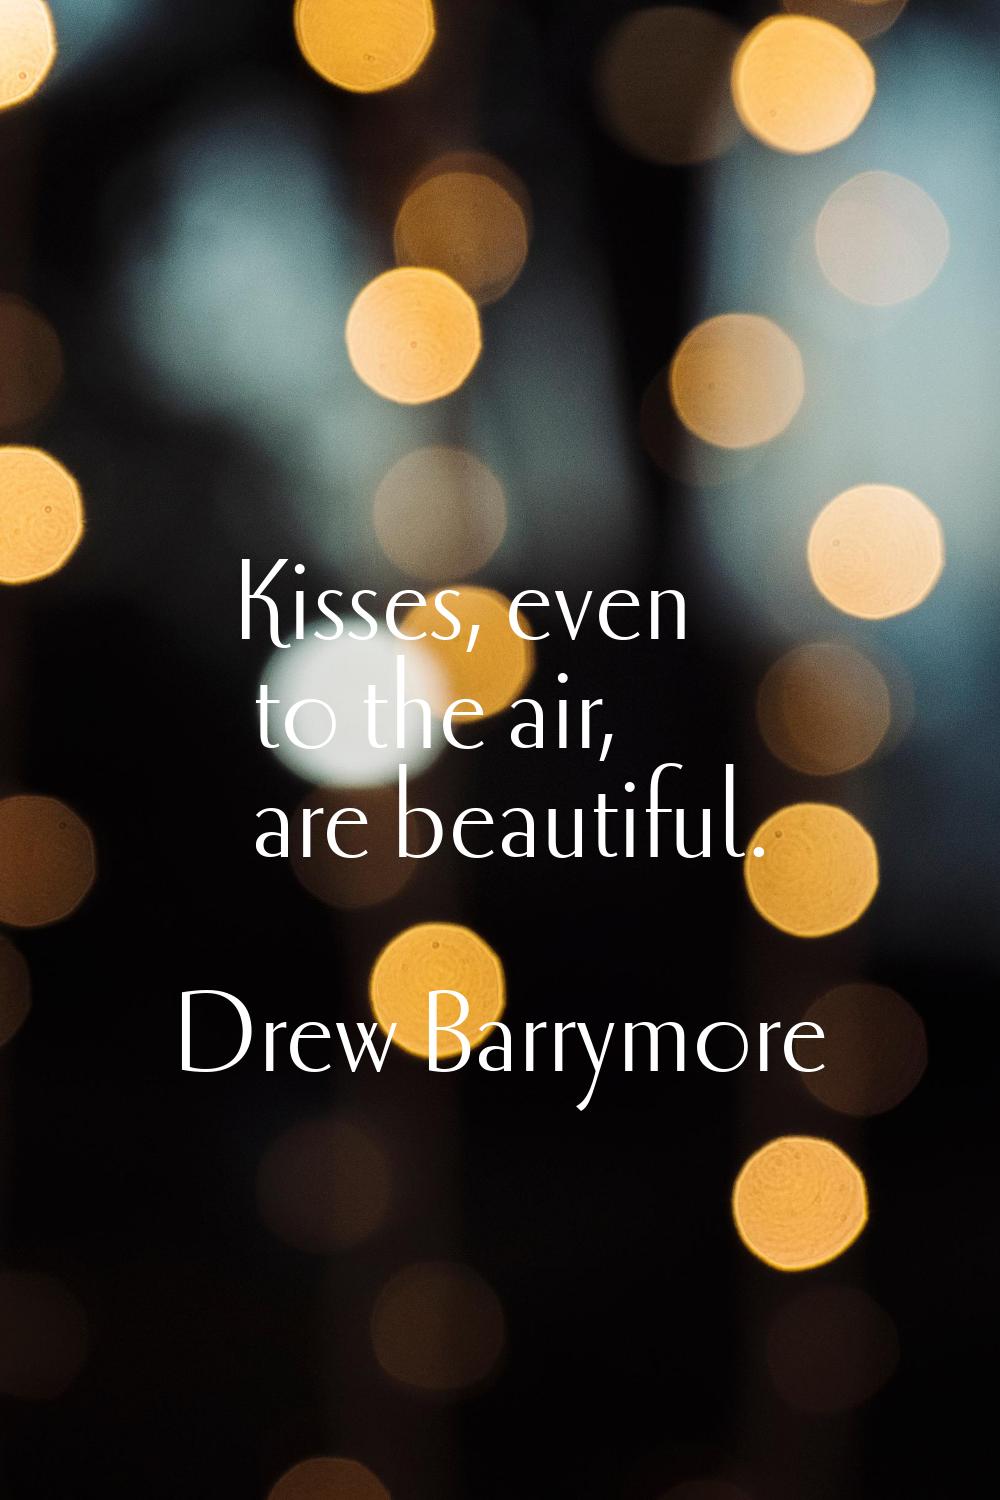 Kisses, even to the air, are beautiful.